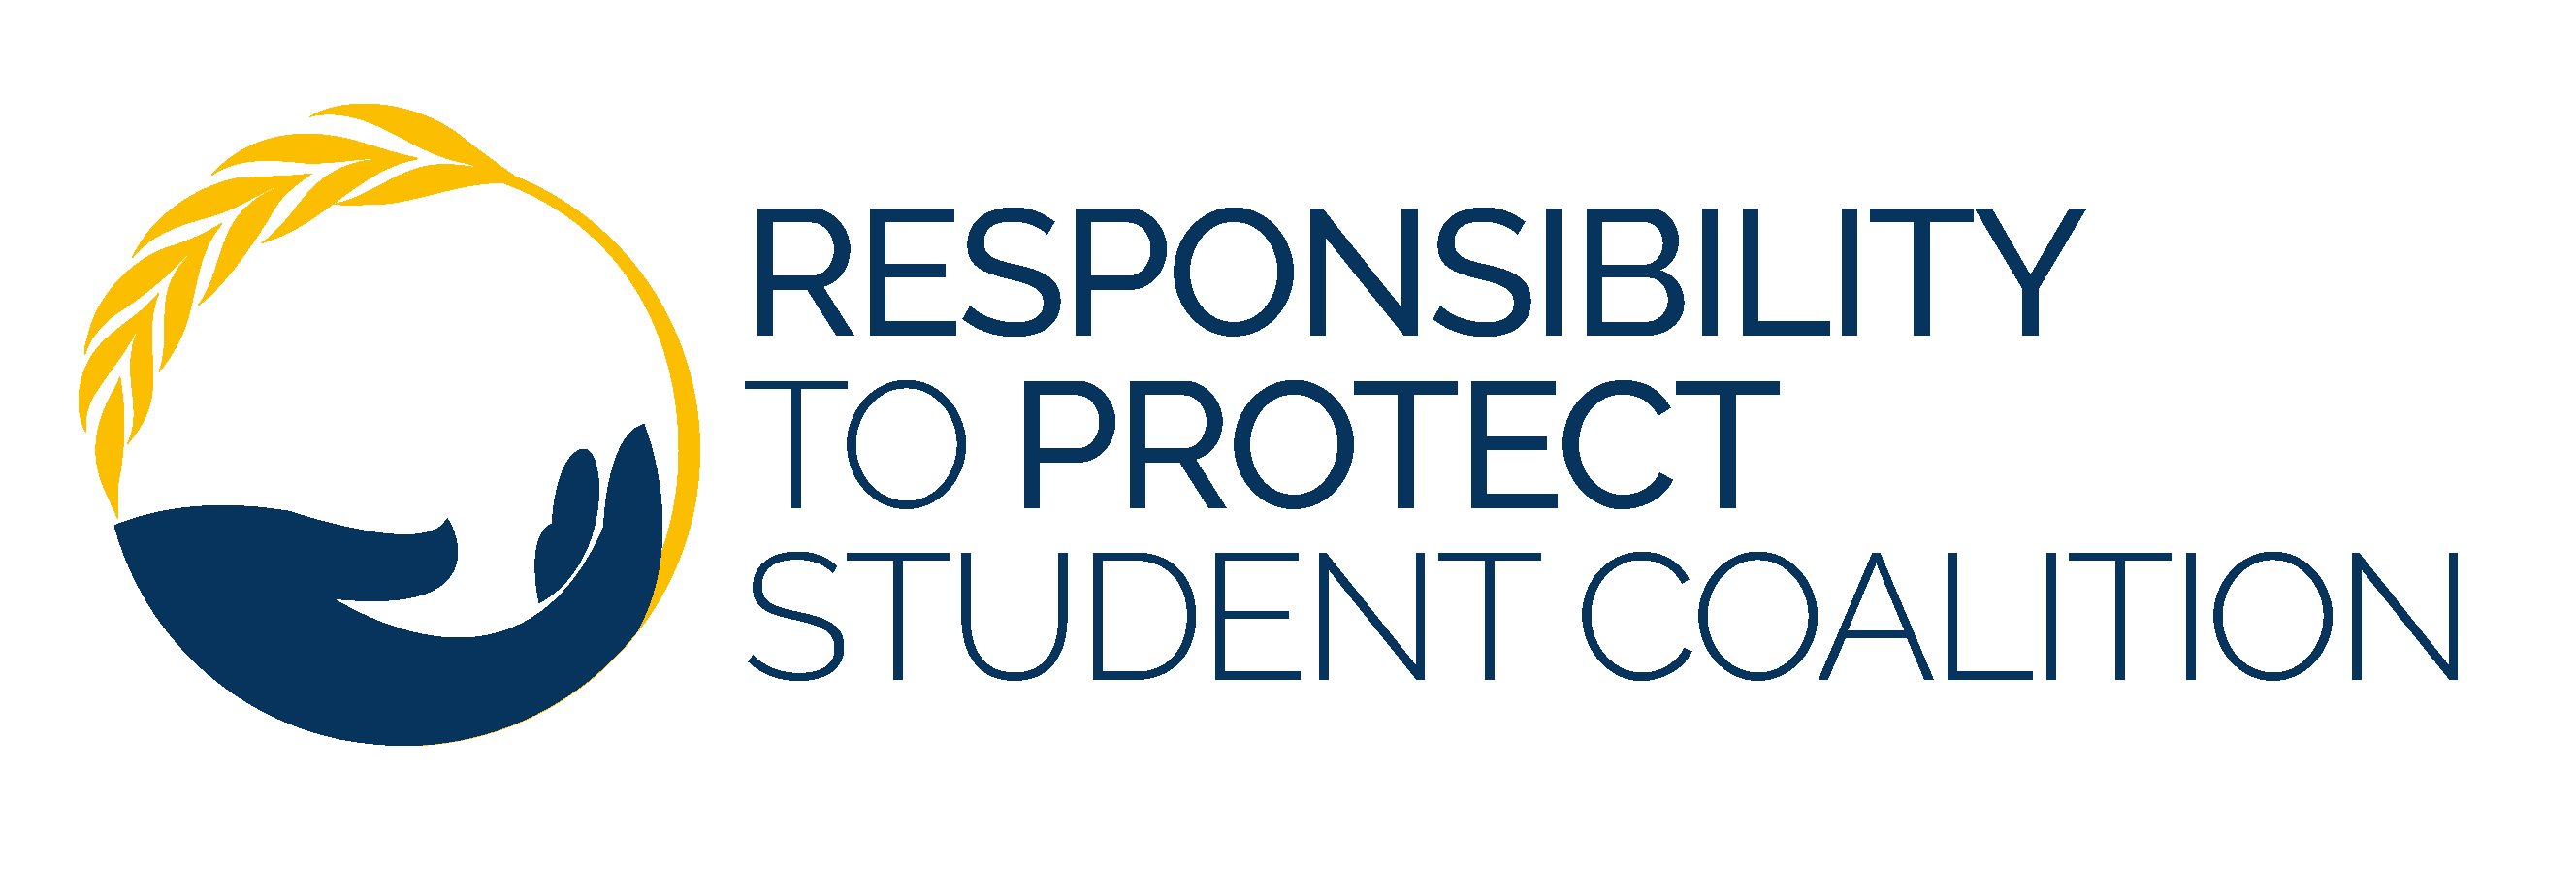 Responsibility to Protect Student Coalition